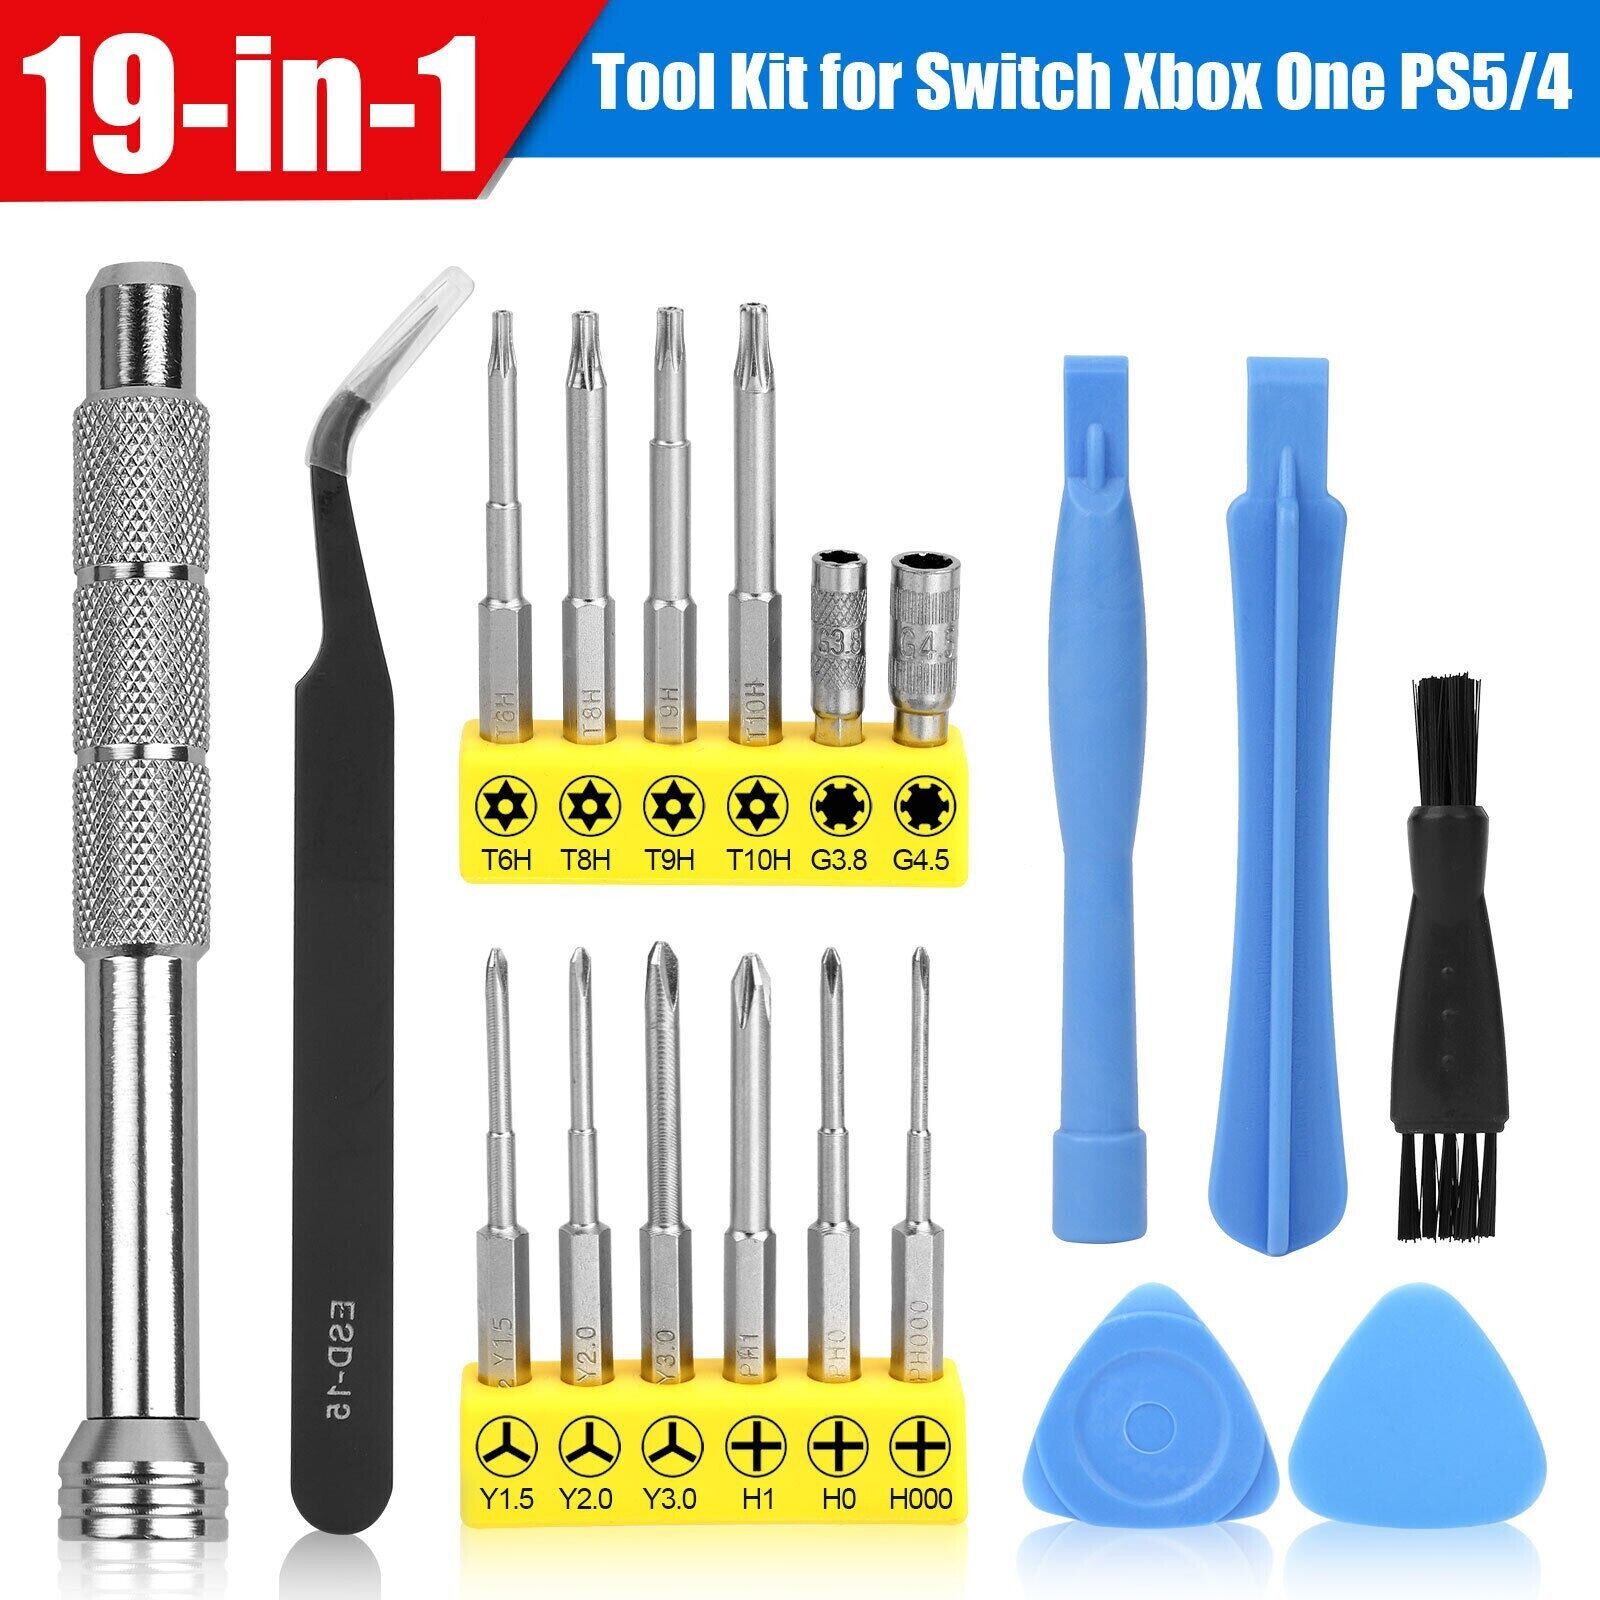 Cleaning Repair Tool Set Screwdriver Kit for PS5 Xbox One Controller Console PS4 - $31.00